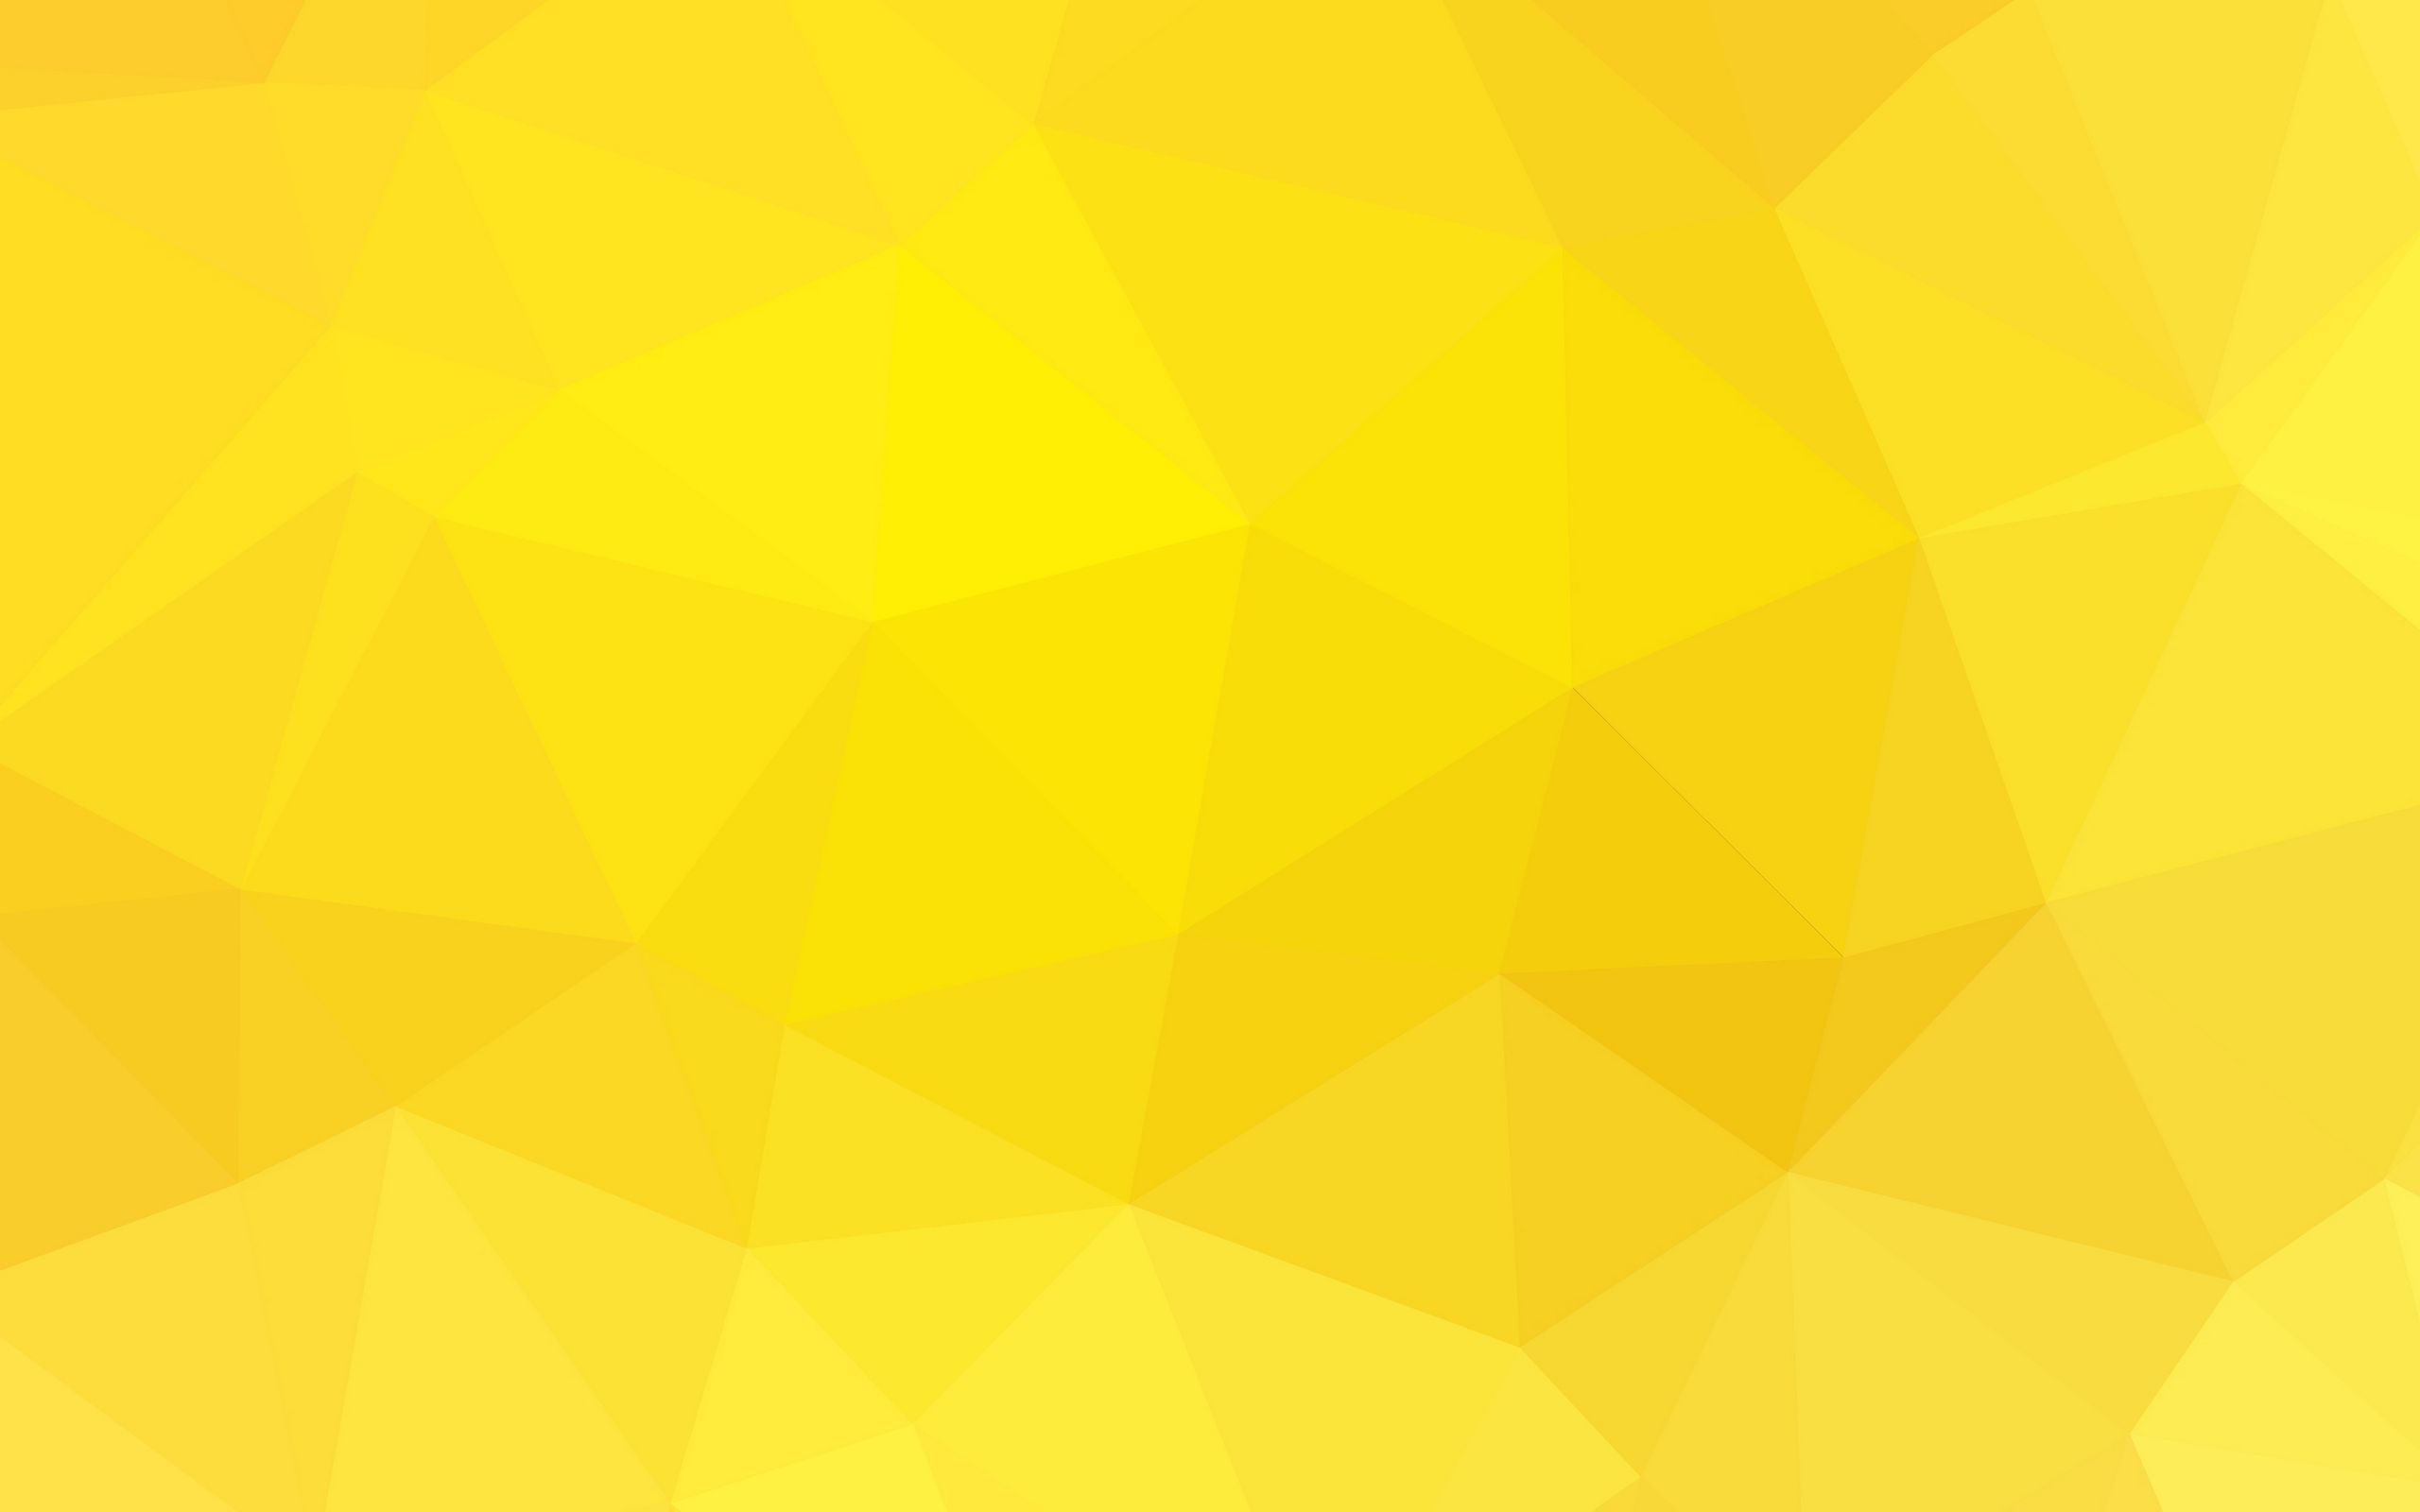 Download wallpaper 2560x1600 polygonal, triangles, shades, yellow